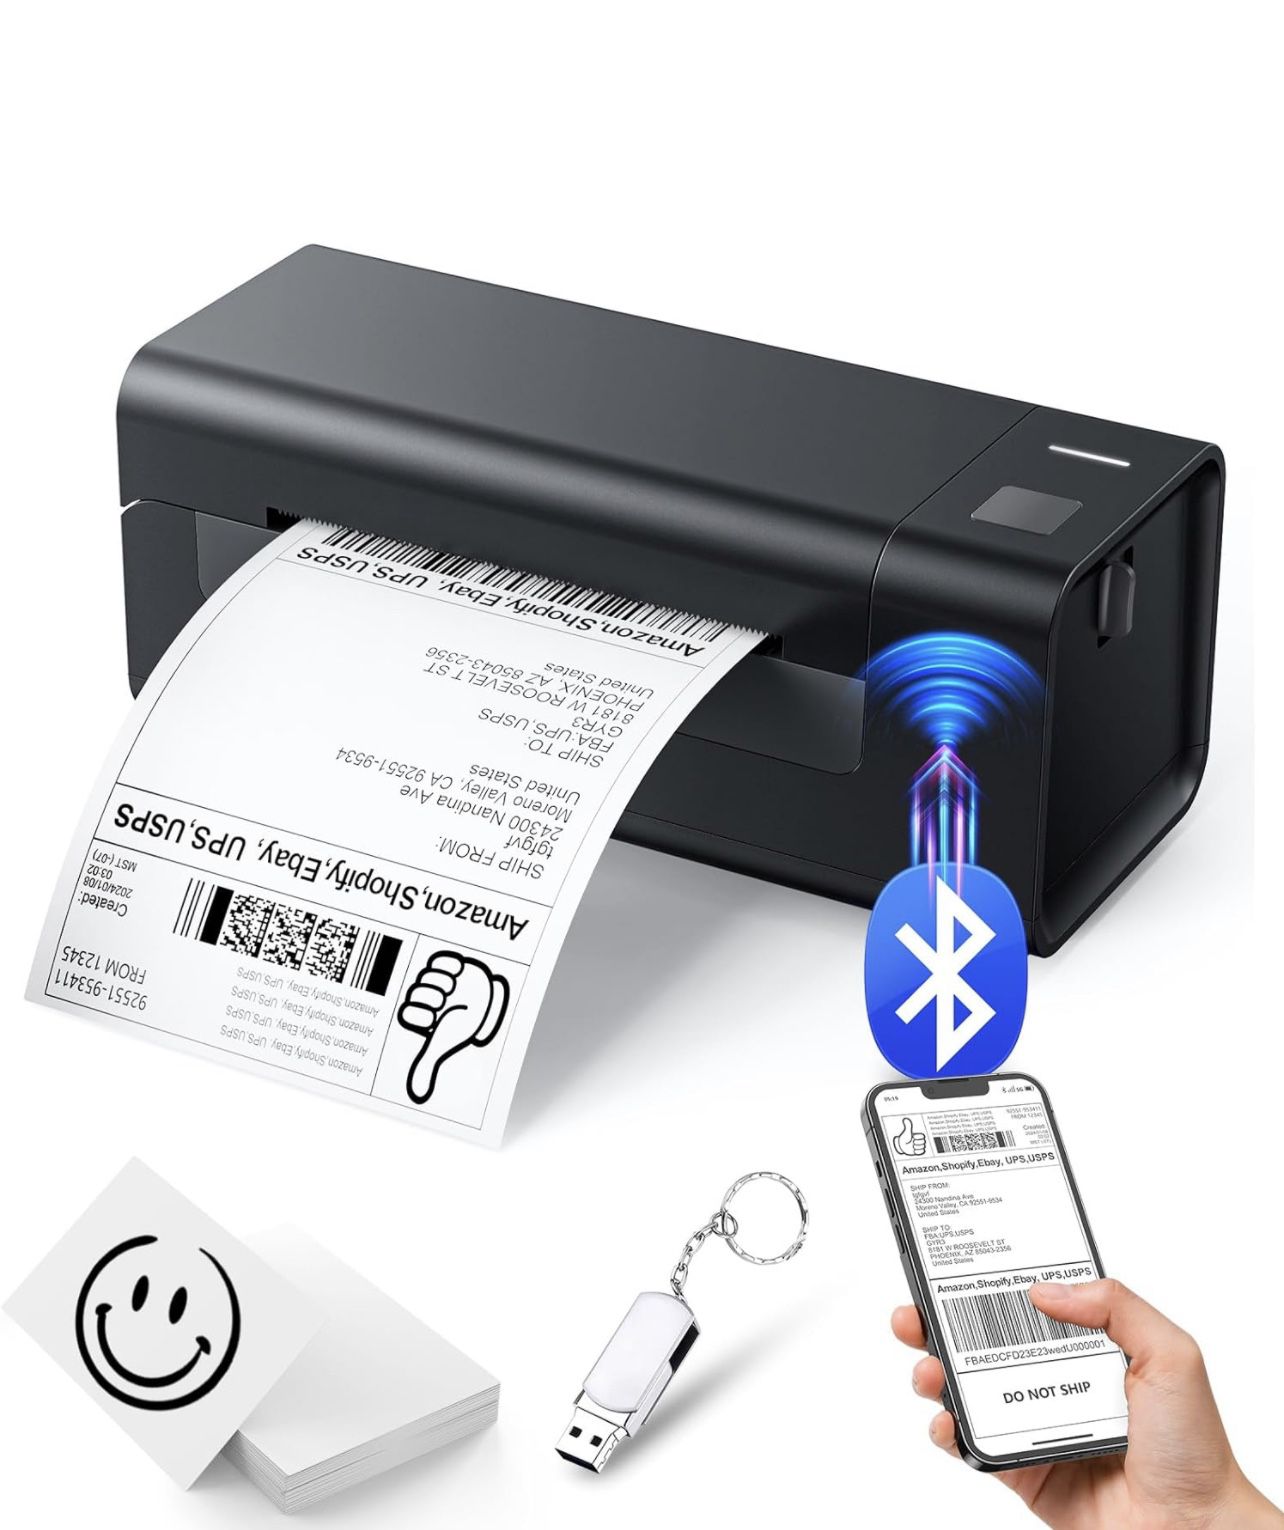 ZRHI Thermal-Label-Printer-Shipping label printer for small business 4x6 Bluetooth thermal printer 300mm/s Compatible Windows,Mac,iOS, Android,desktop